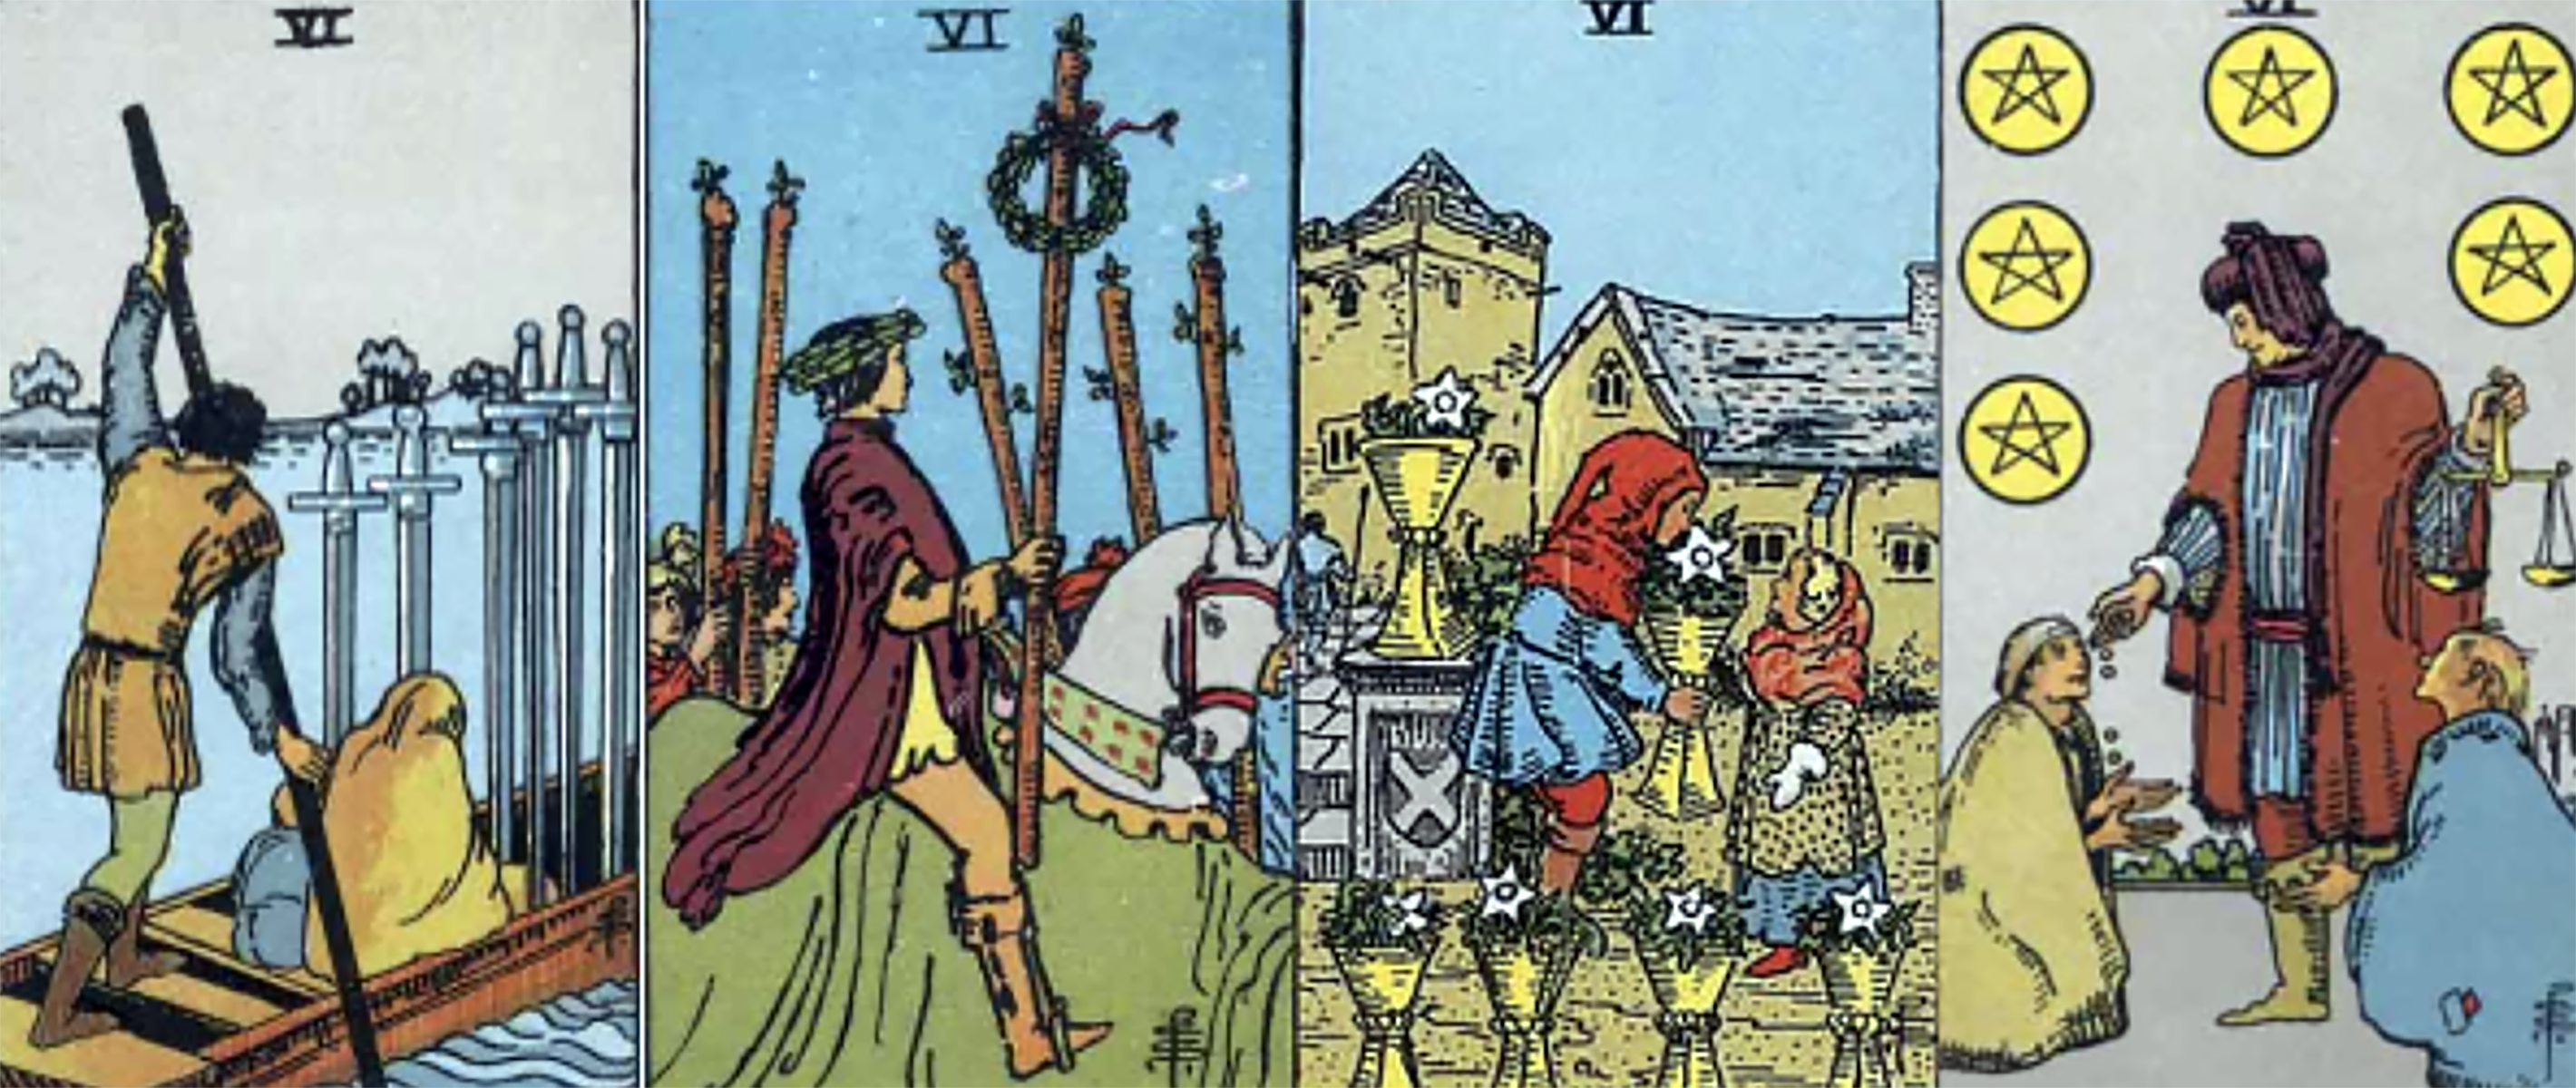 An image depicting all four of the "6" cards in the Tarot: from left to right, 6 of swords, 6 of wands, 6 of cups and 6 of pentacles